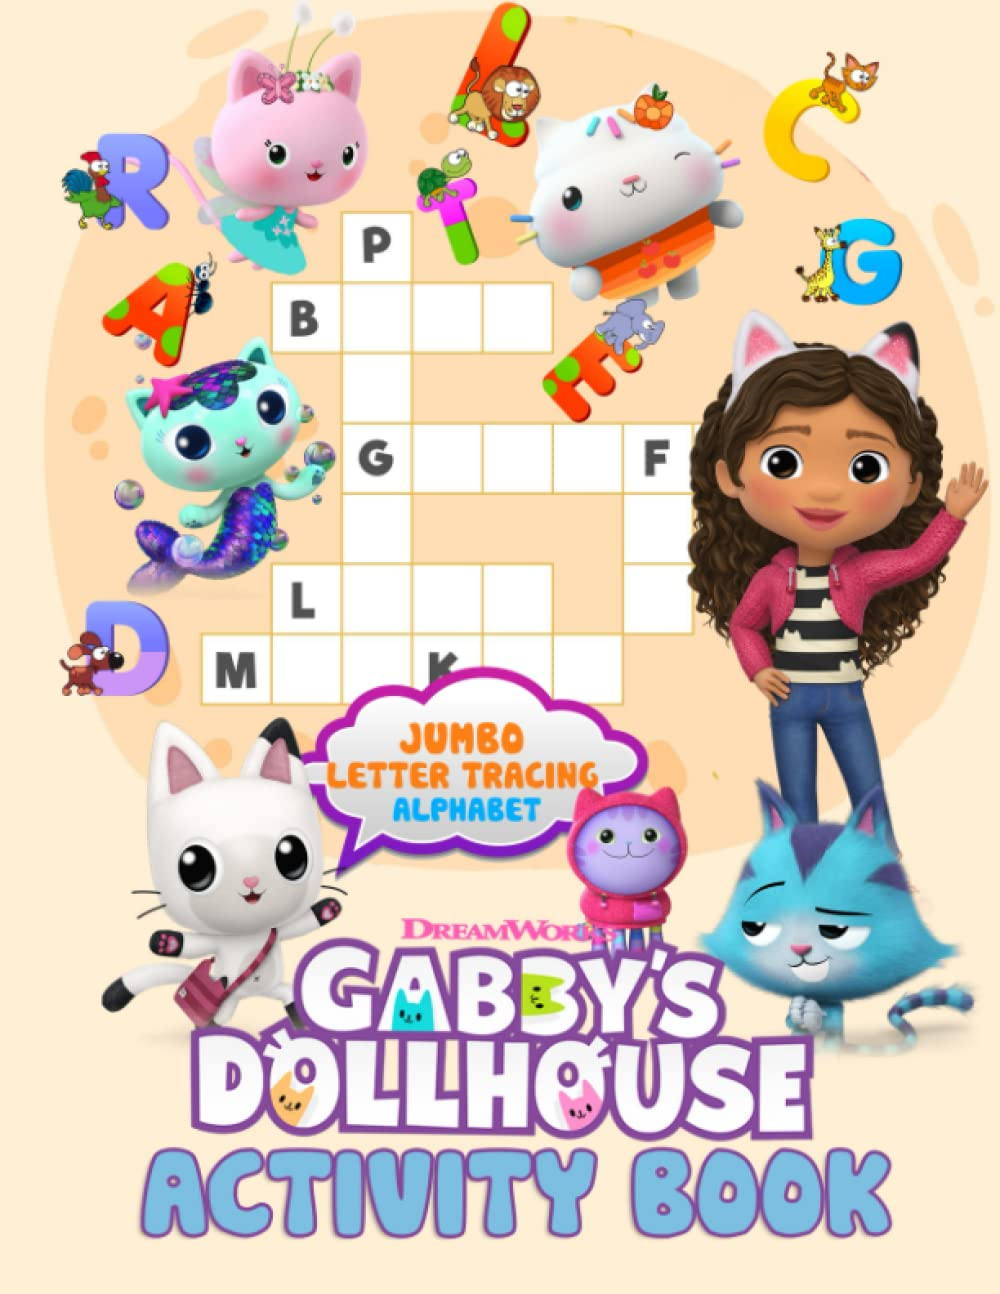 G bby s Dollhous Activity Book Many Activities Including Colouring 